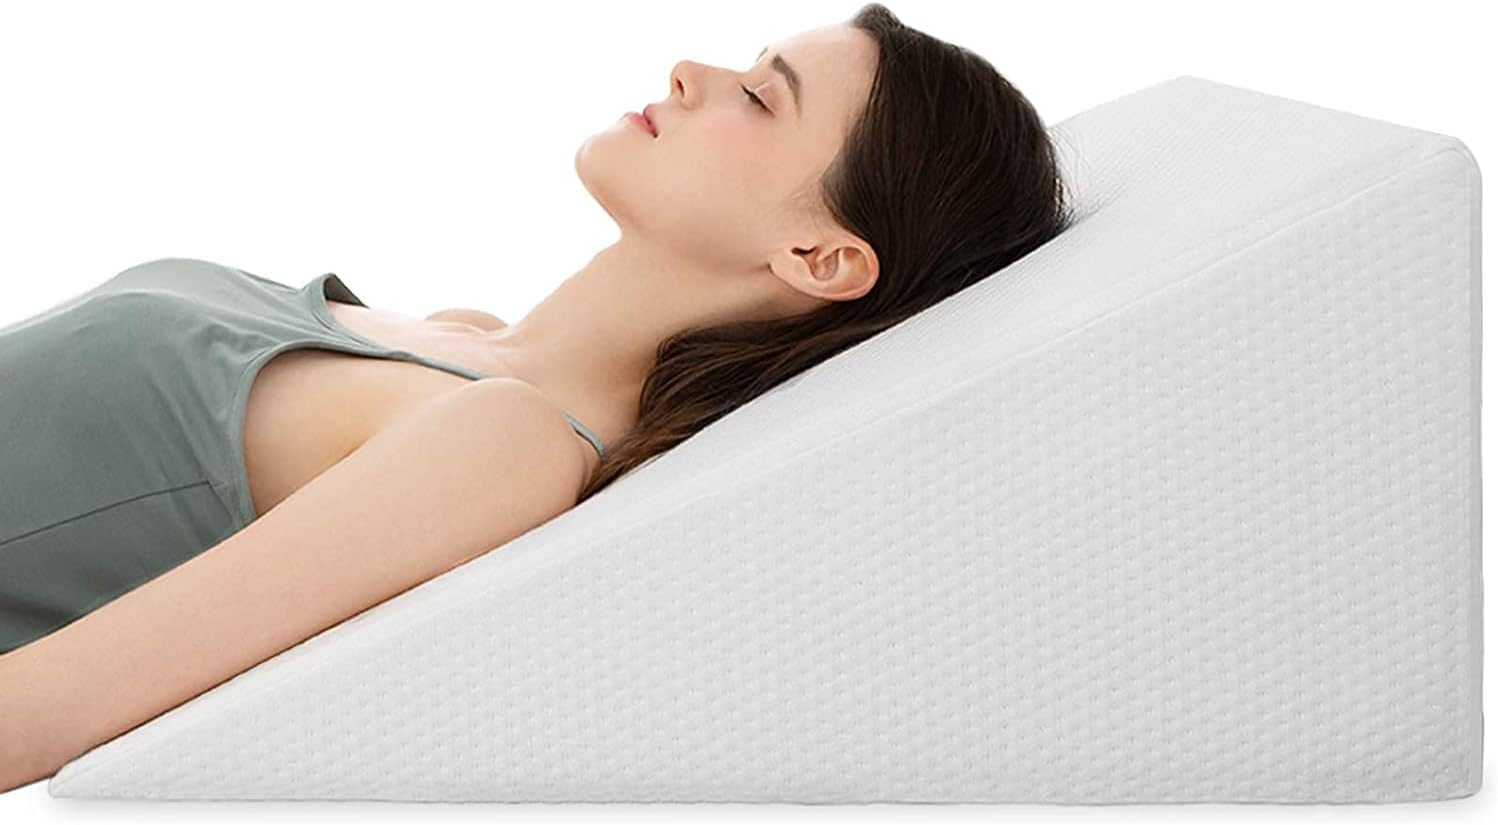 Deep Sleep Orthopedic Bed Wedge Pillow With HD Foam Top Elevation For Sleeping, Acid Reflux, Heartburn, Anti Snoring And Gerd Pillow, Ideal For Neck Pain, Back Support (W55 X L55 Cm, Standard: 8&quot;)